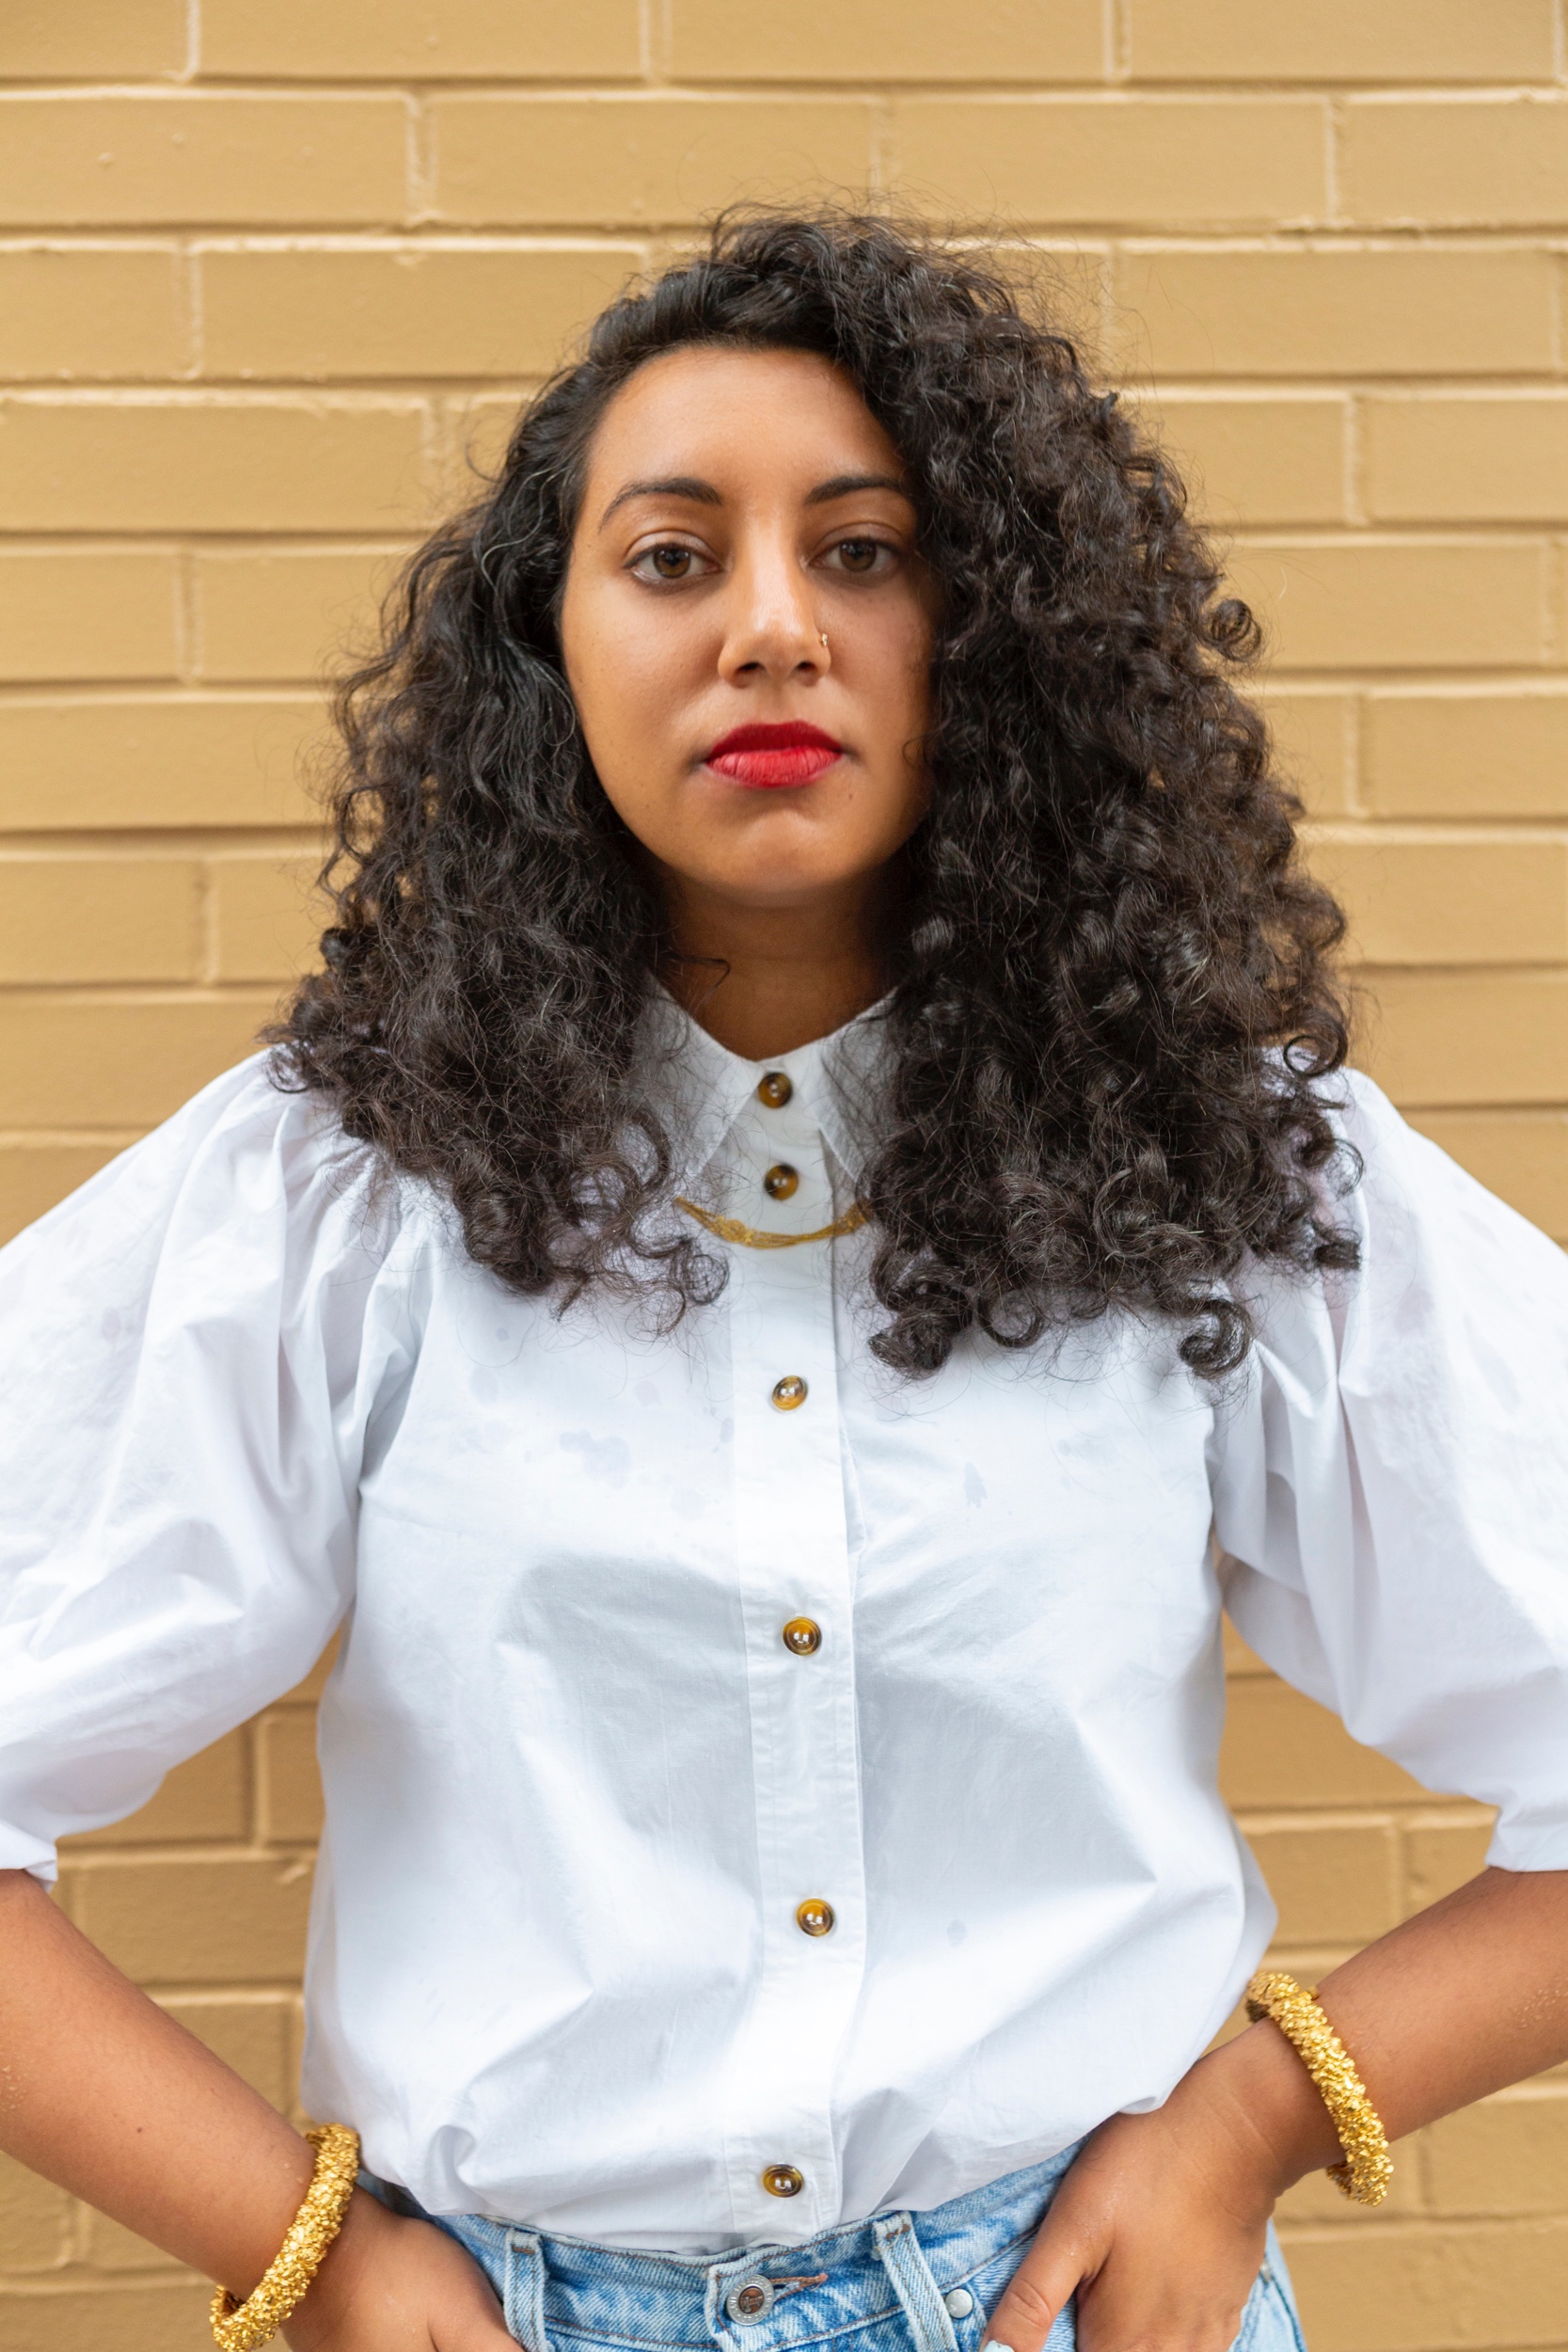 Diya stands, arms at hip, against a yellow-ish brick wall. She wears a white button down shirt with big sleeves, gold bangles and hoops, and a red lip.